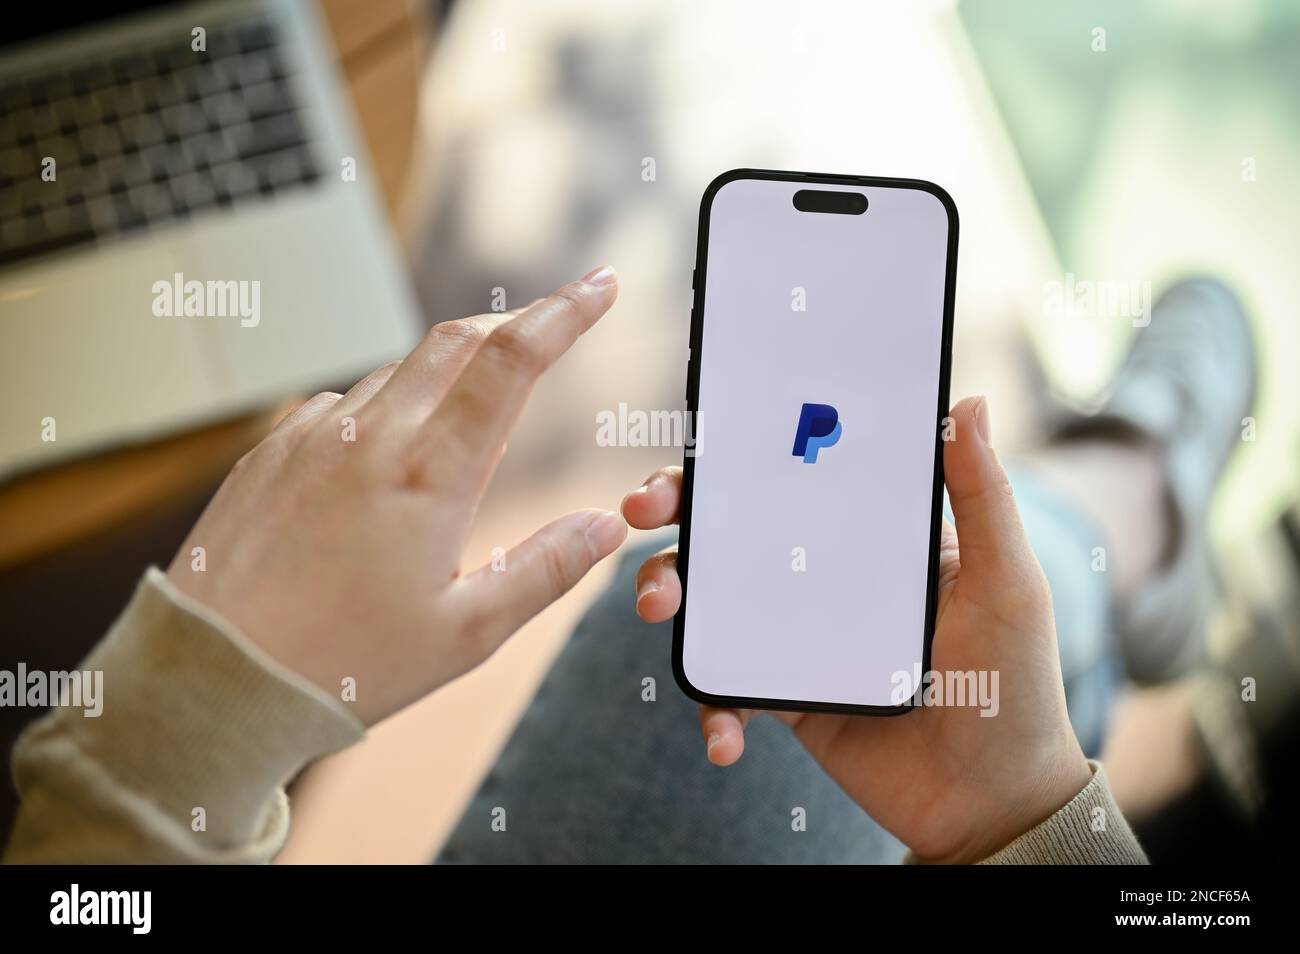 Chiang mai, Thailand - Feb 14 2023: Close-up image of a woman's hand holding a smartphone with PayPal logo on screen, using PayPal application on her Stock Photo